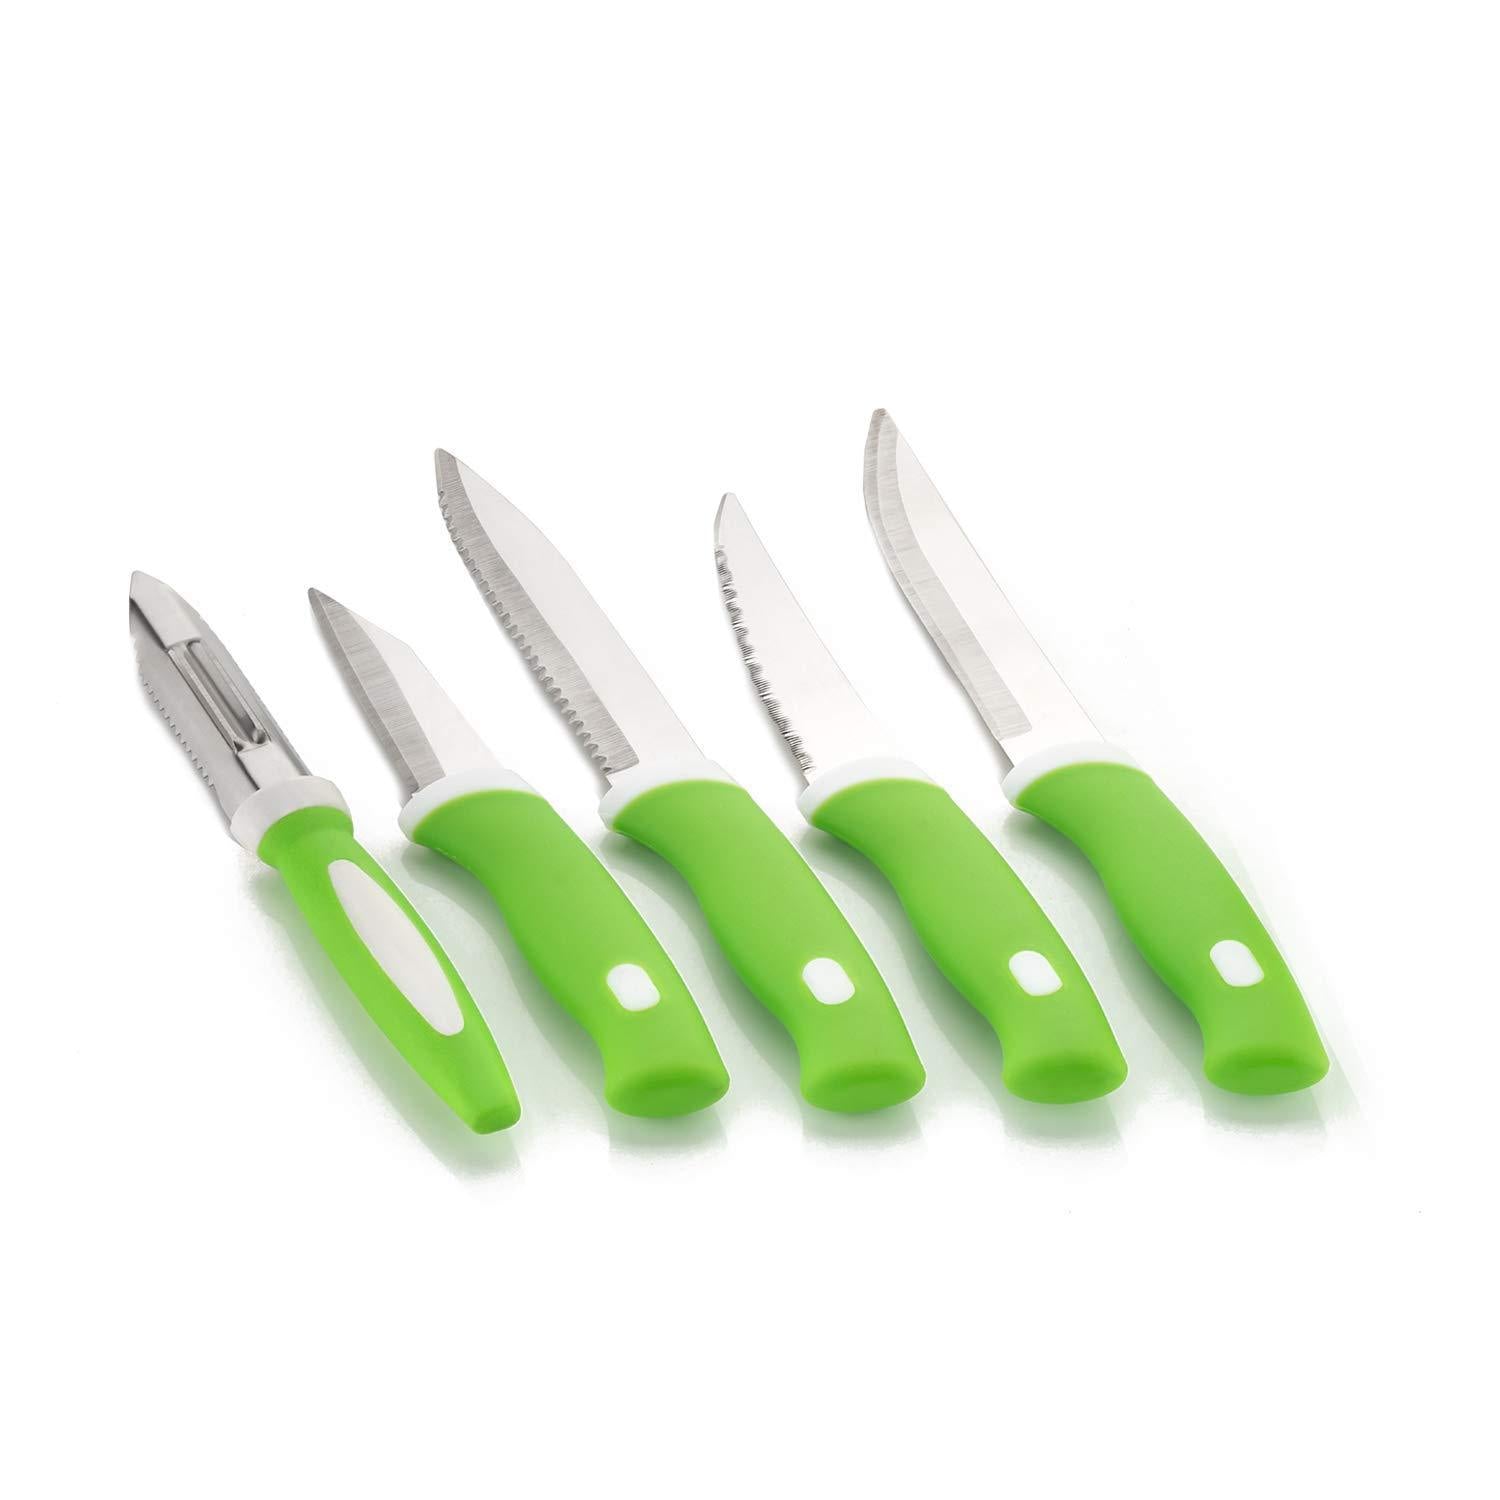 2211 Stainless Steel Knife & Peeler Set with Stand - 6 Pcs - SkyShopy